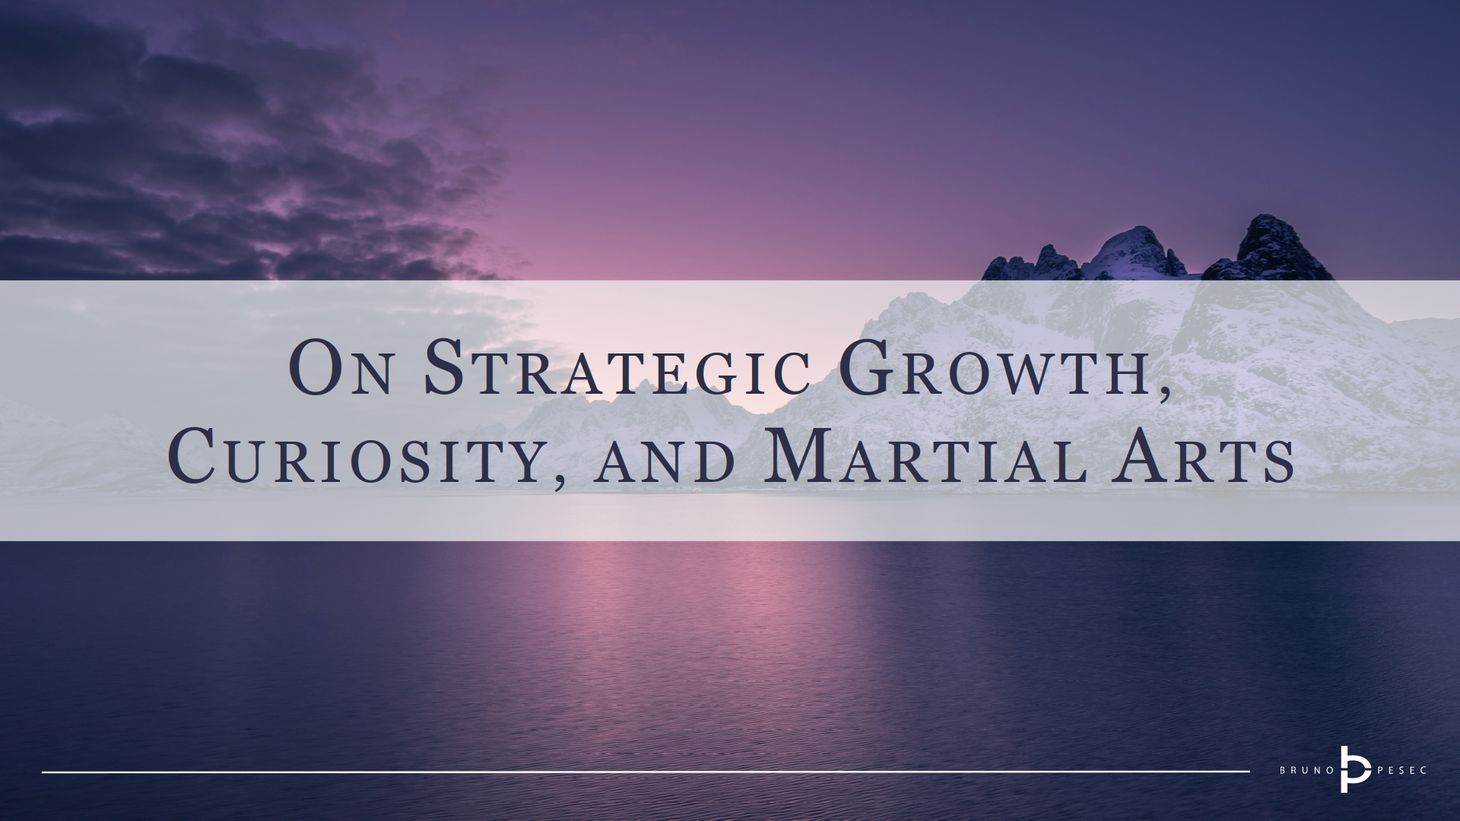 On strategic growth, curiosity, and martial arts